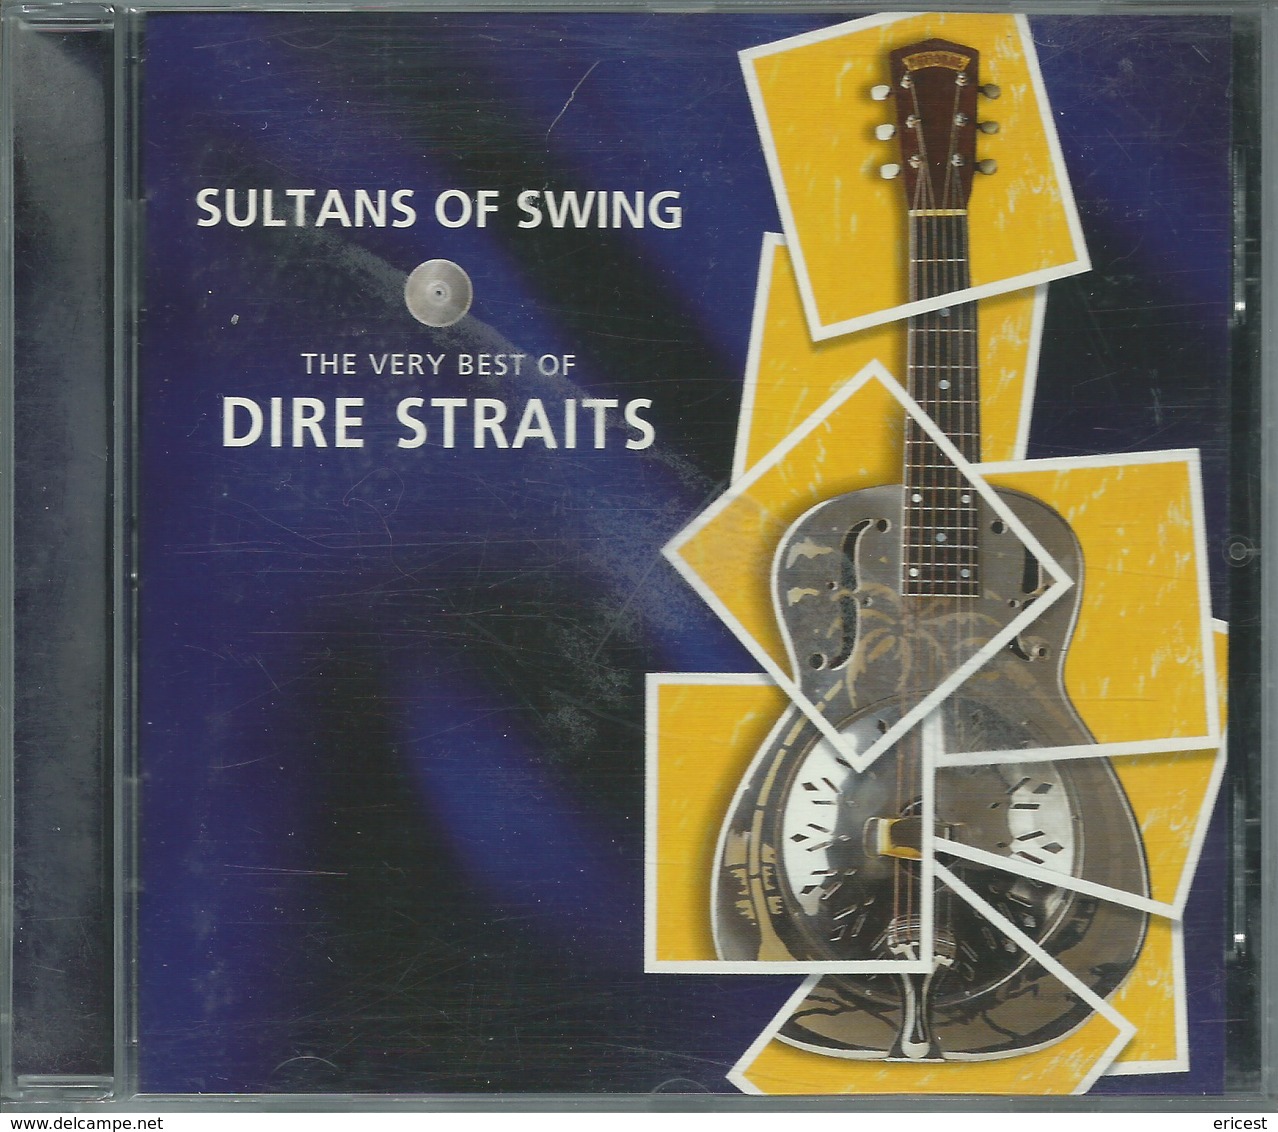 - CD DIRE STRAITS SULTANS OF SWING - Disco, Pop